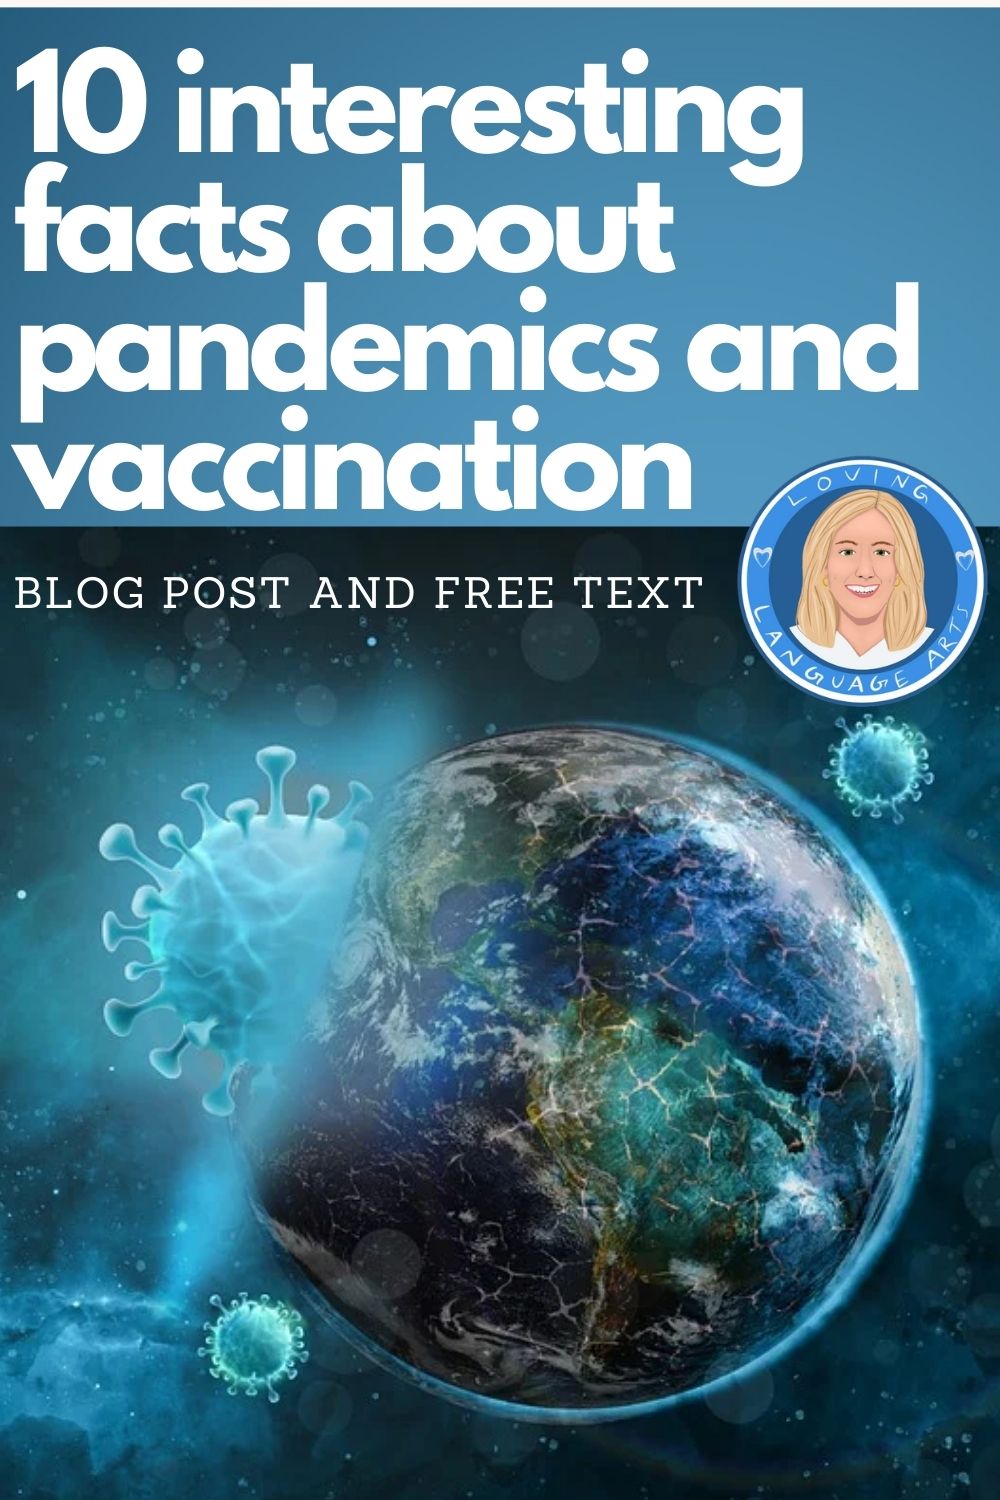 blog post 10 interesting facts about pandemics and vaccination k-12 reading